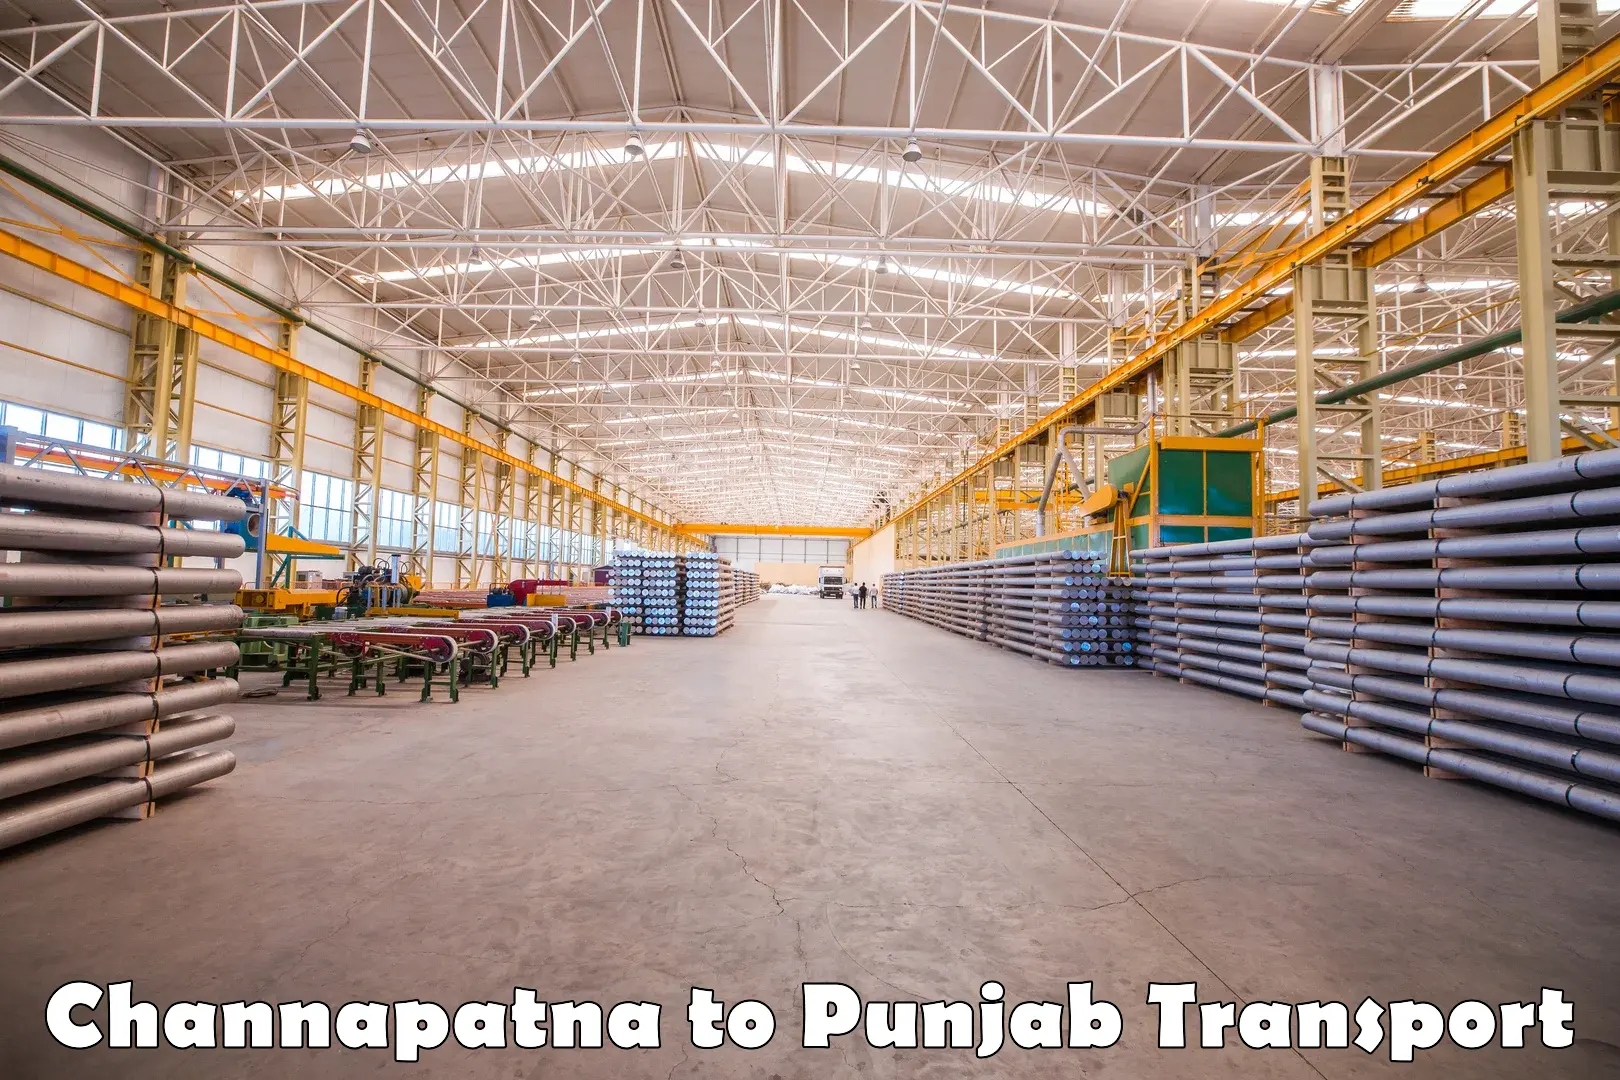 Transport shared services Channapatna to Punjab